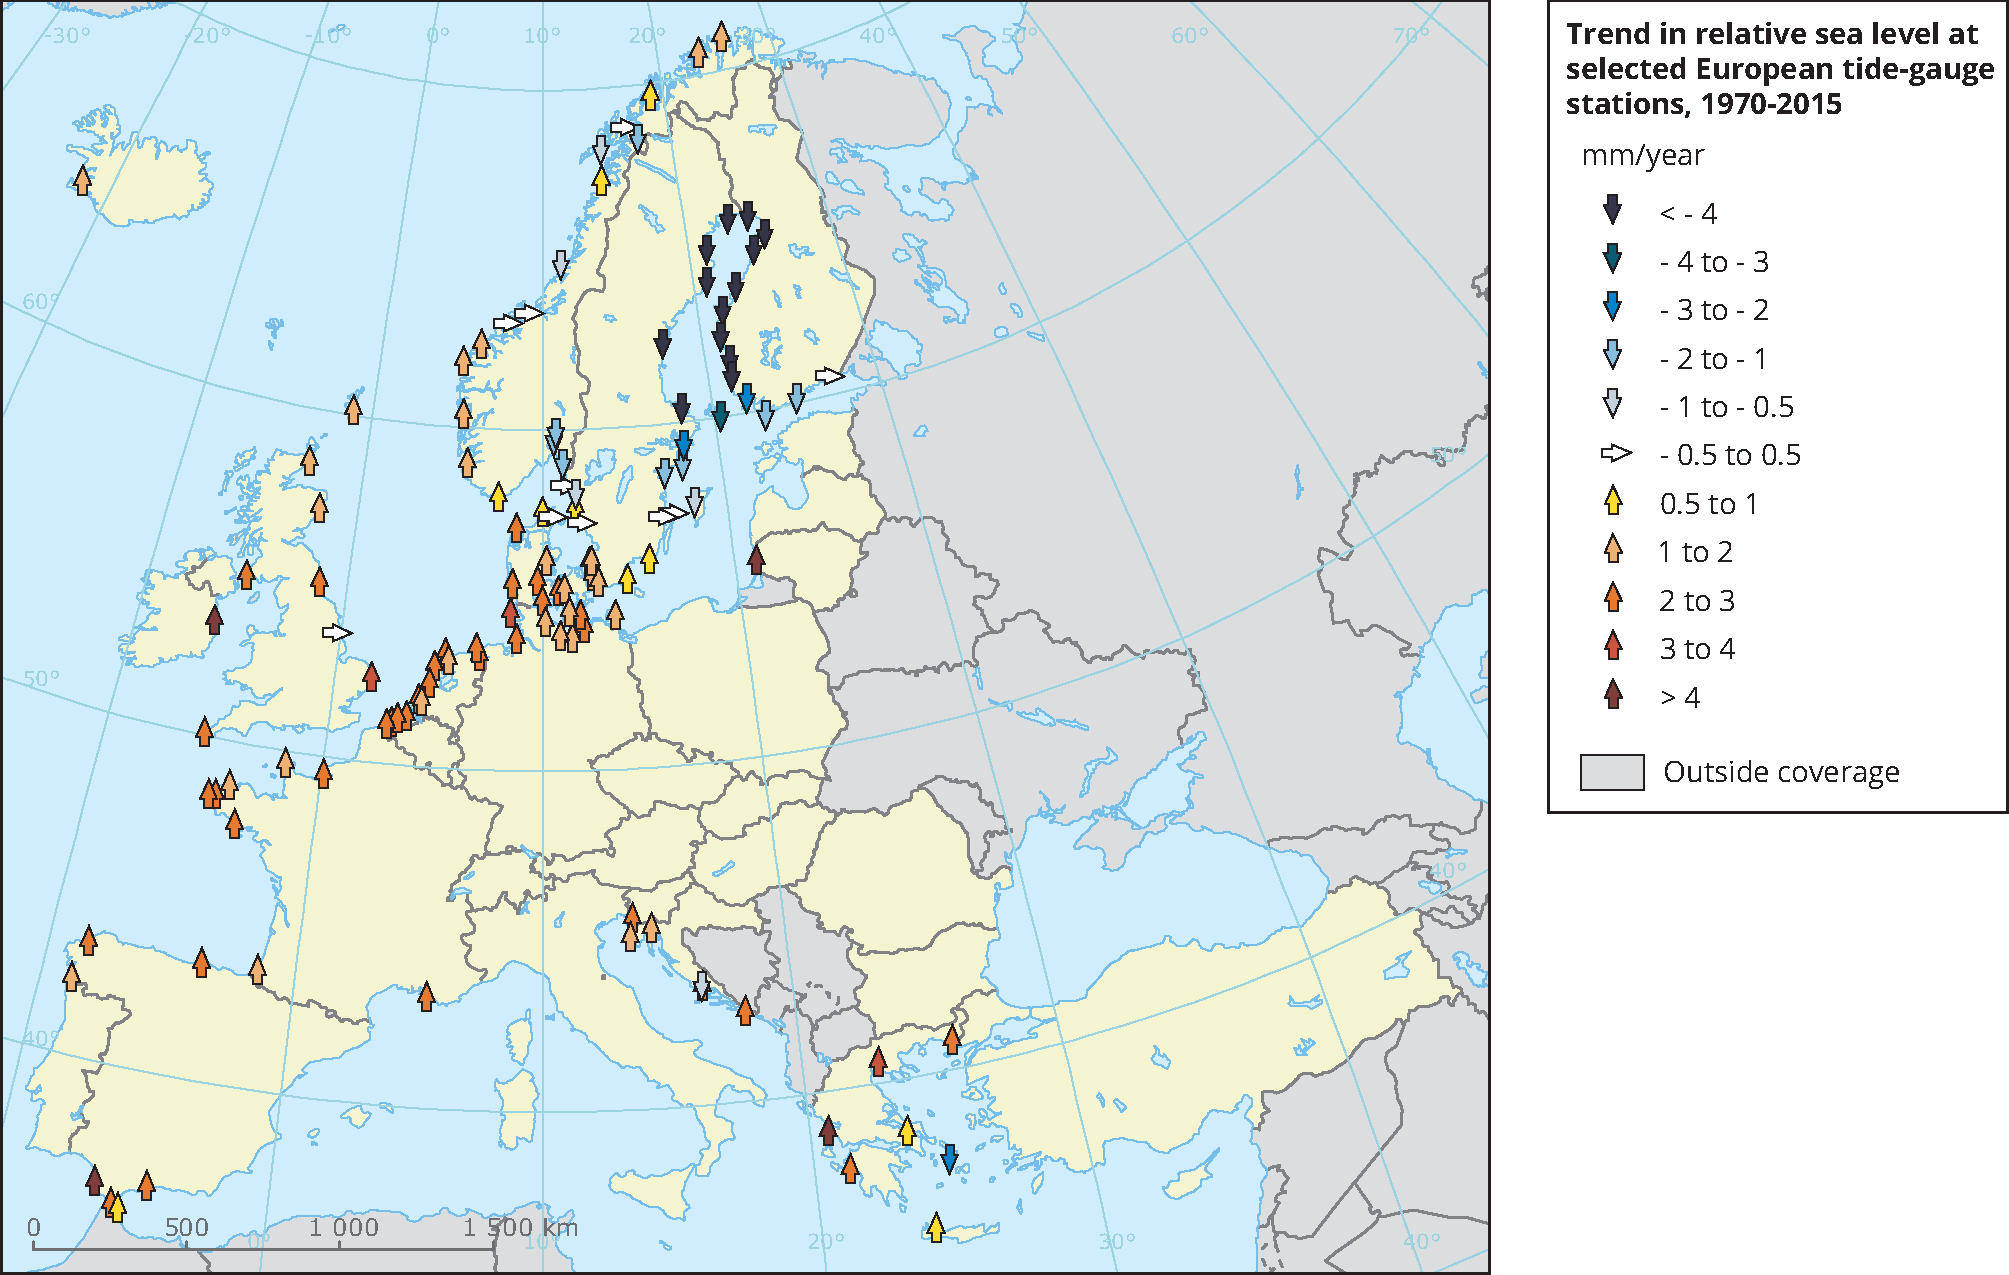 Trend in relative sea level at selected European tide gauge stations